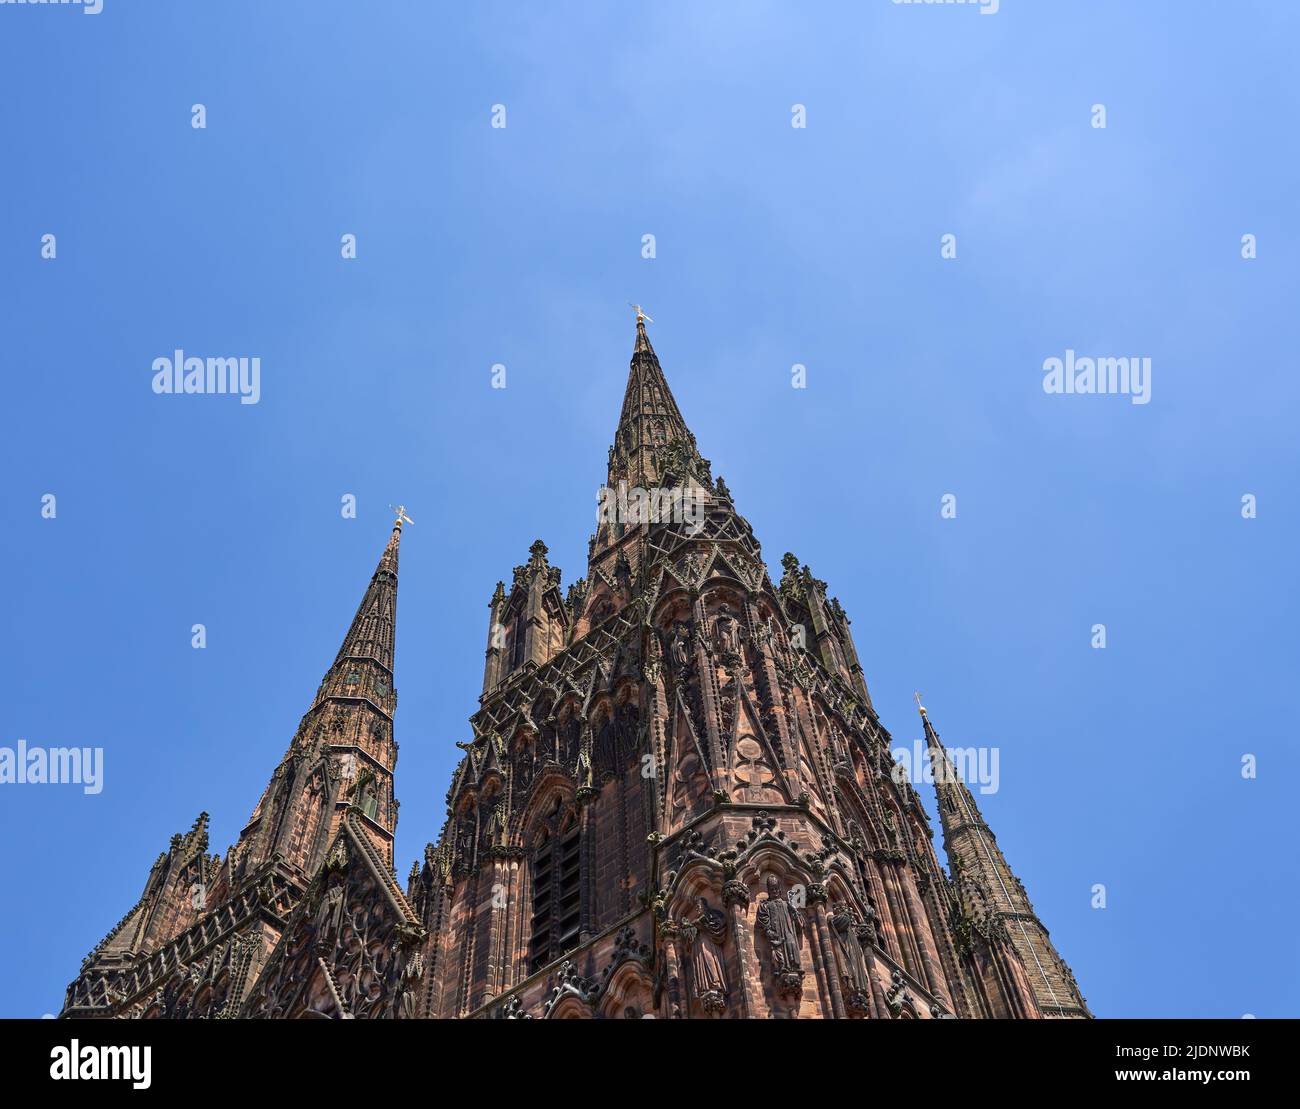 Tall cathedral spires example Stock Photo